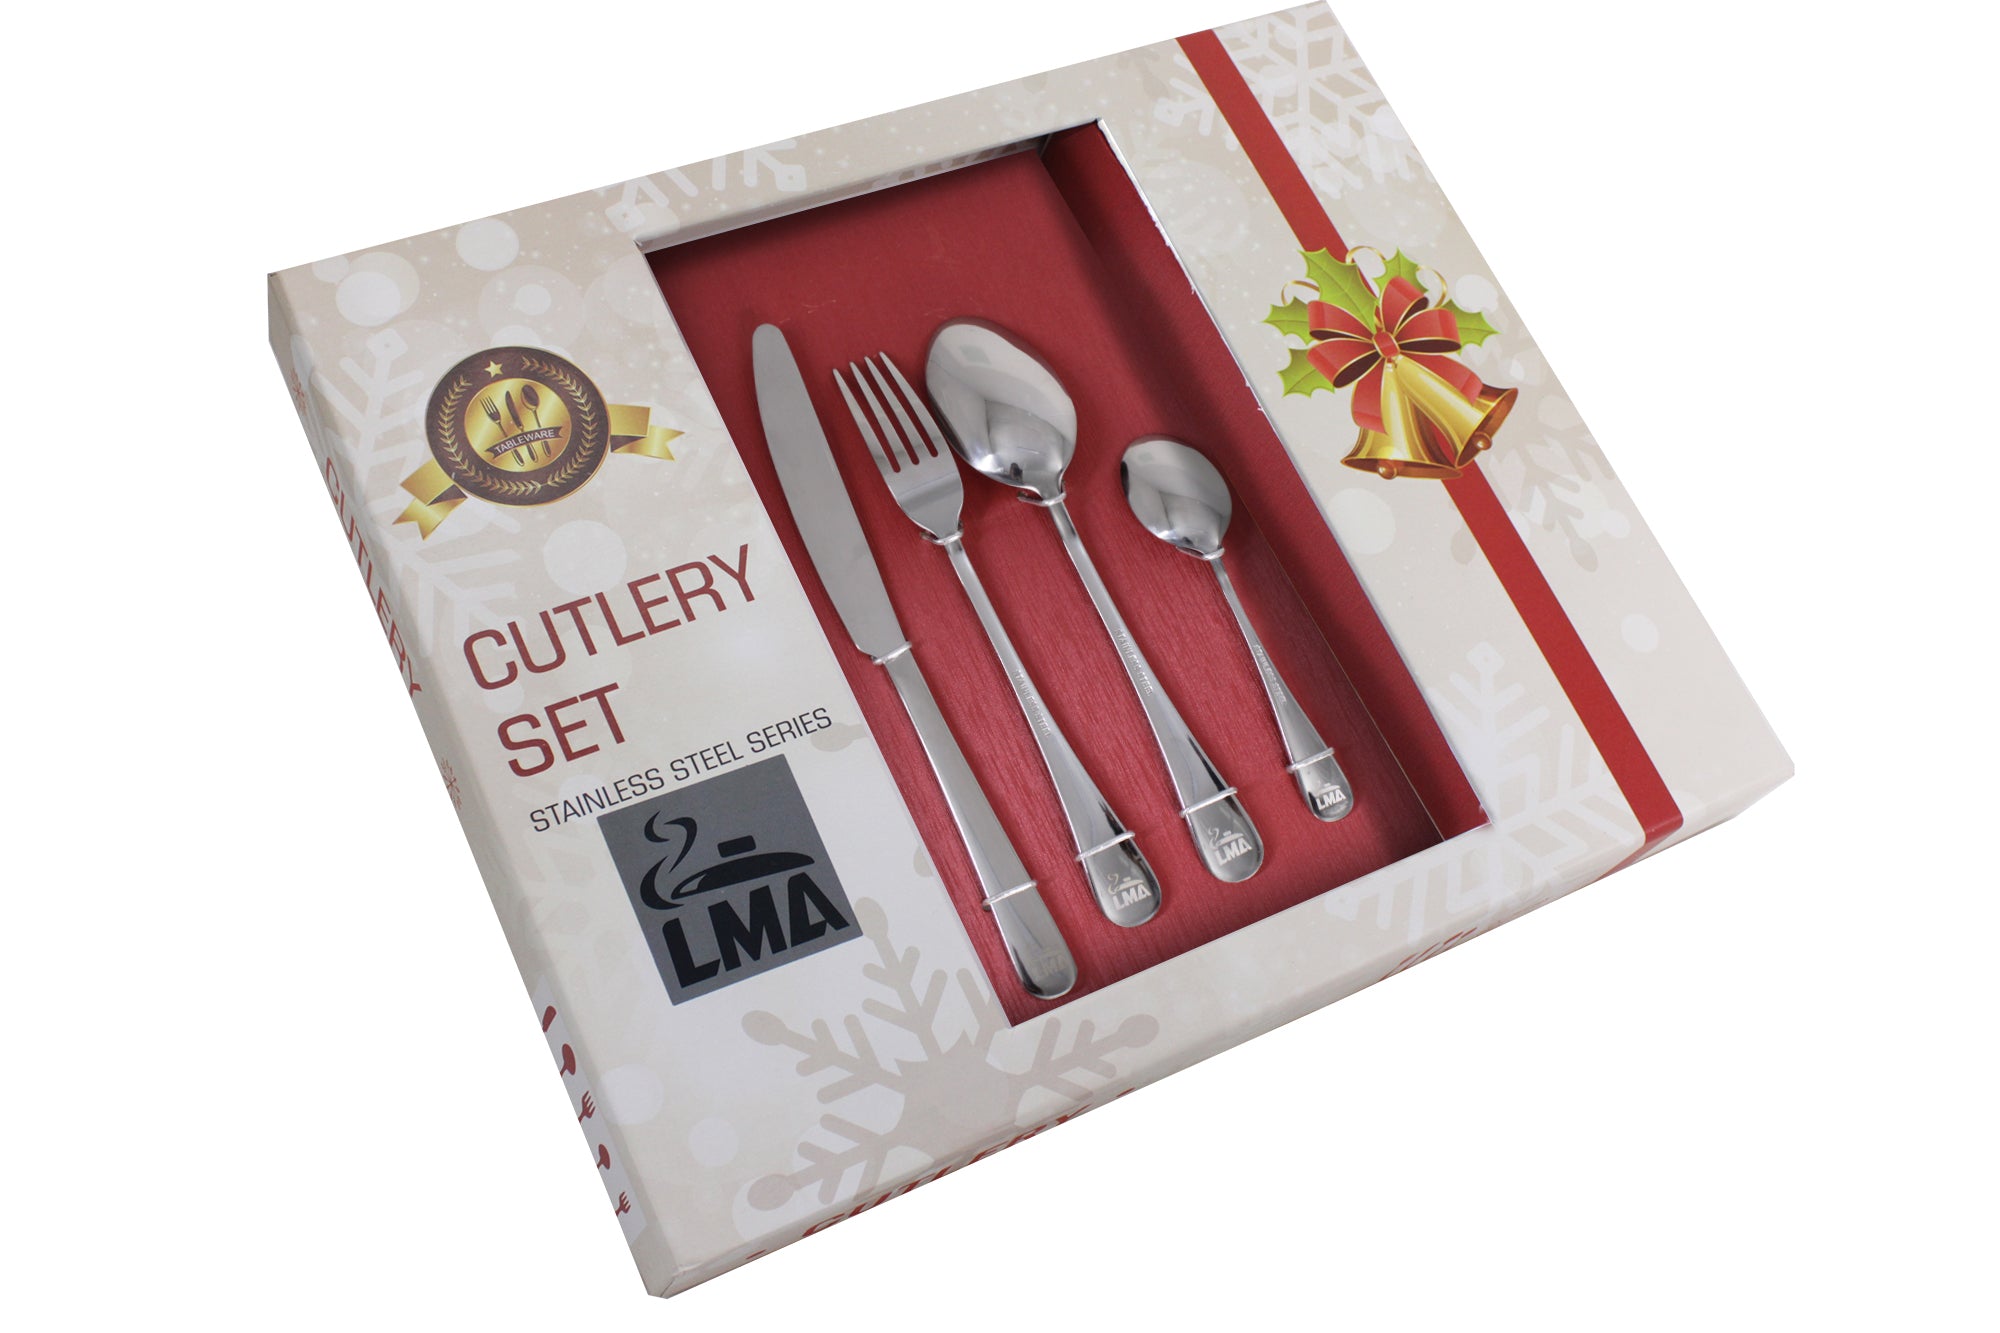 LMA 24 Piece Stainless Steel Cutlery Set in Christmas Gift Box